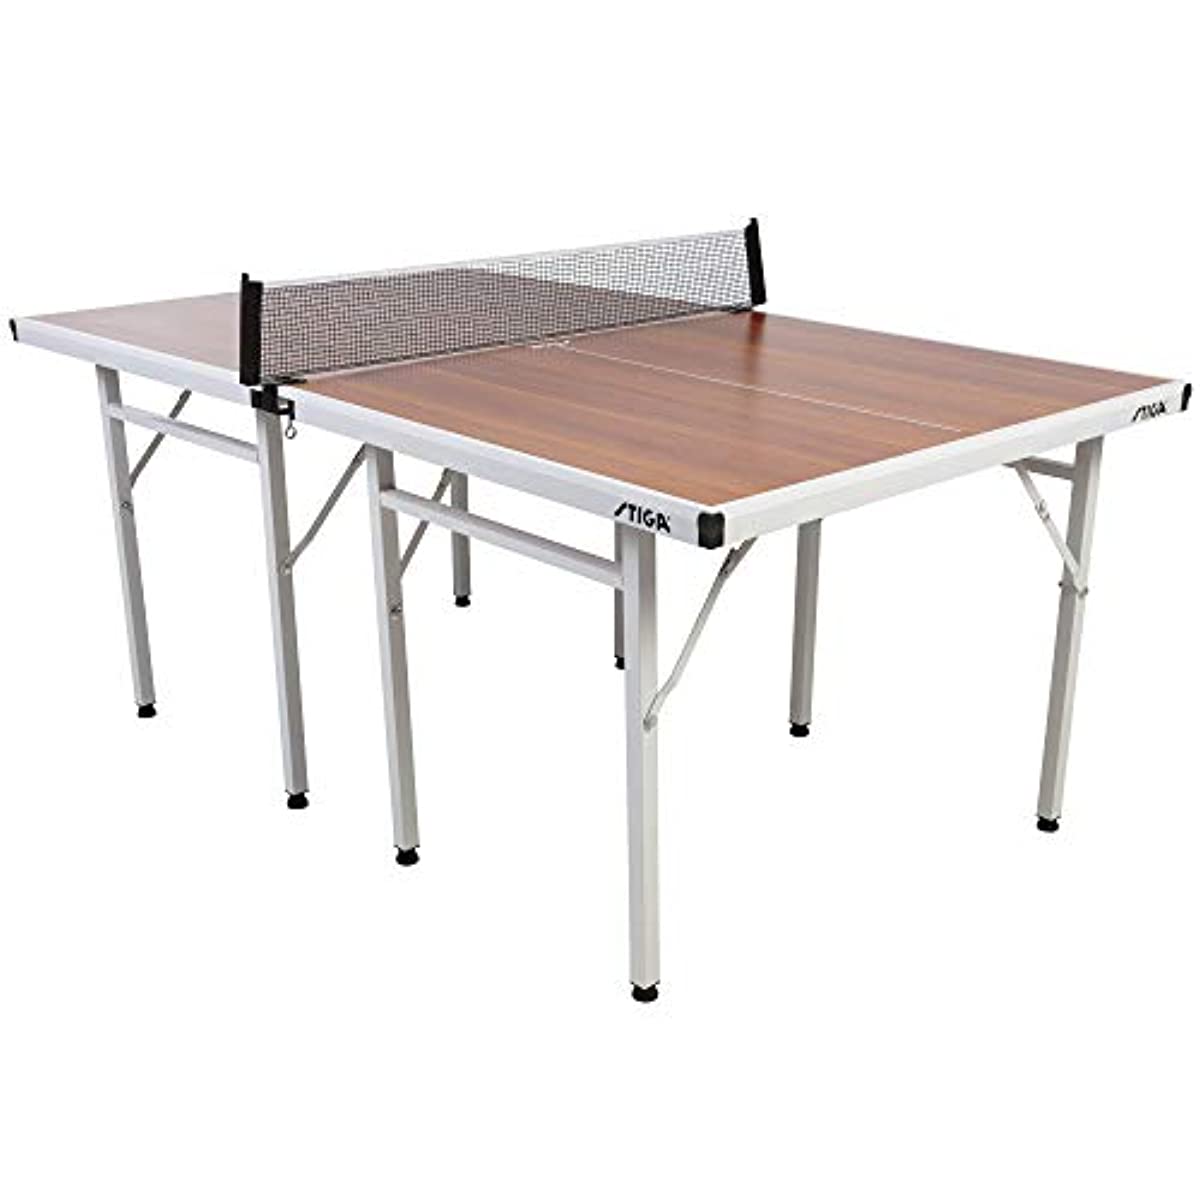 Picture of Stiga T8460-2W Space Saver Table Tennis Table, Brown - Woodgrain